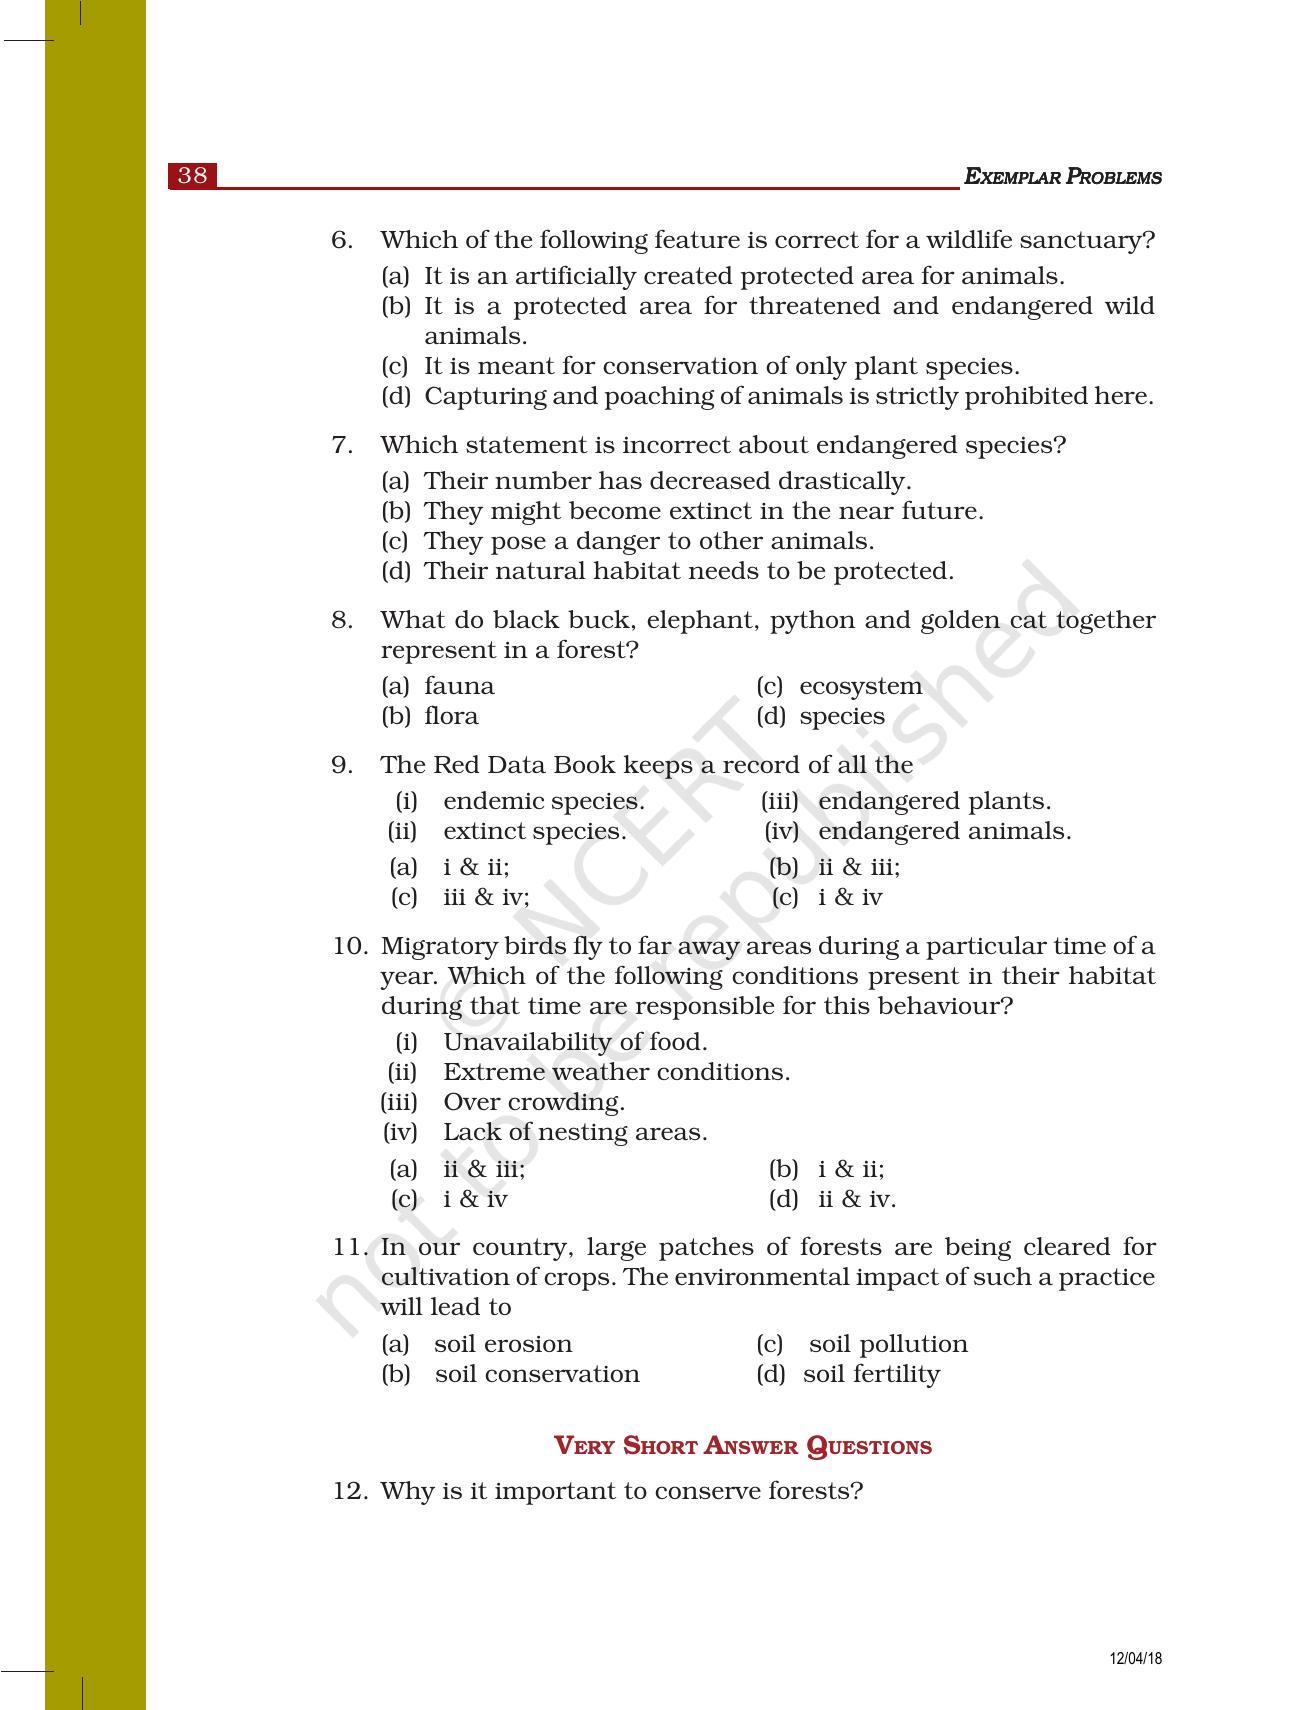 NCERT Exemplar Book for Class 8 Science: Chapter 7- Conservation of Plants and Animals - Page 2